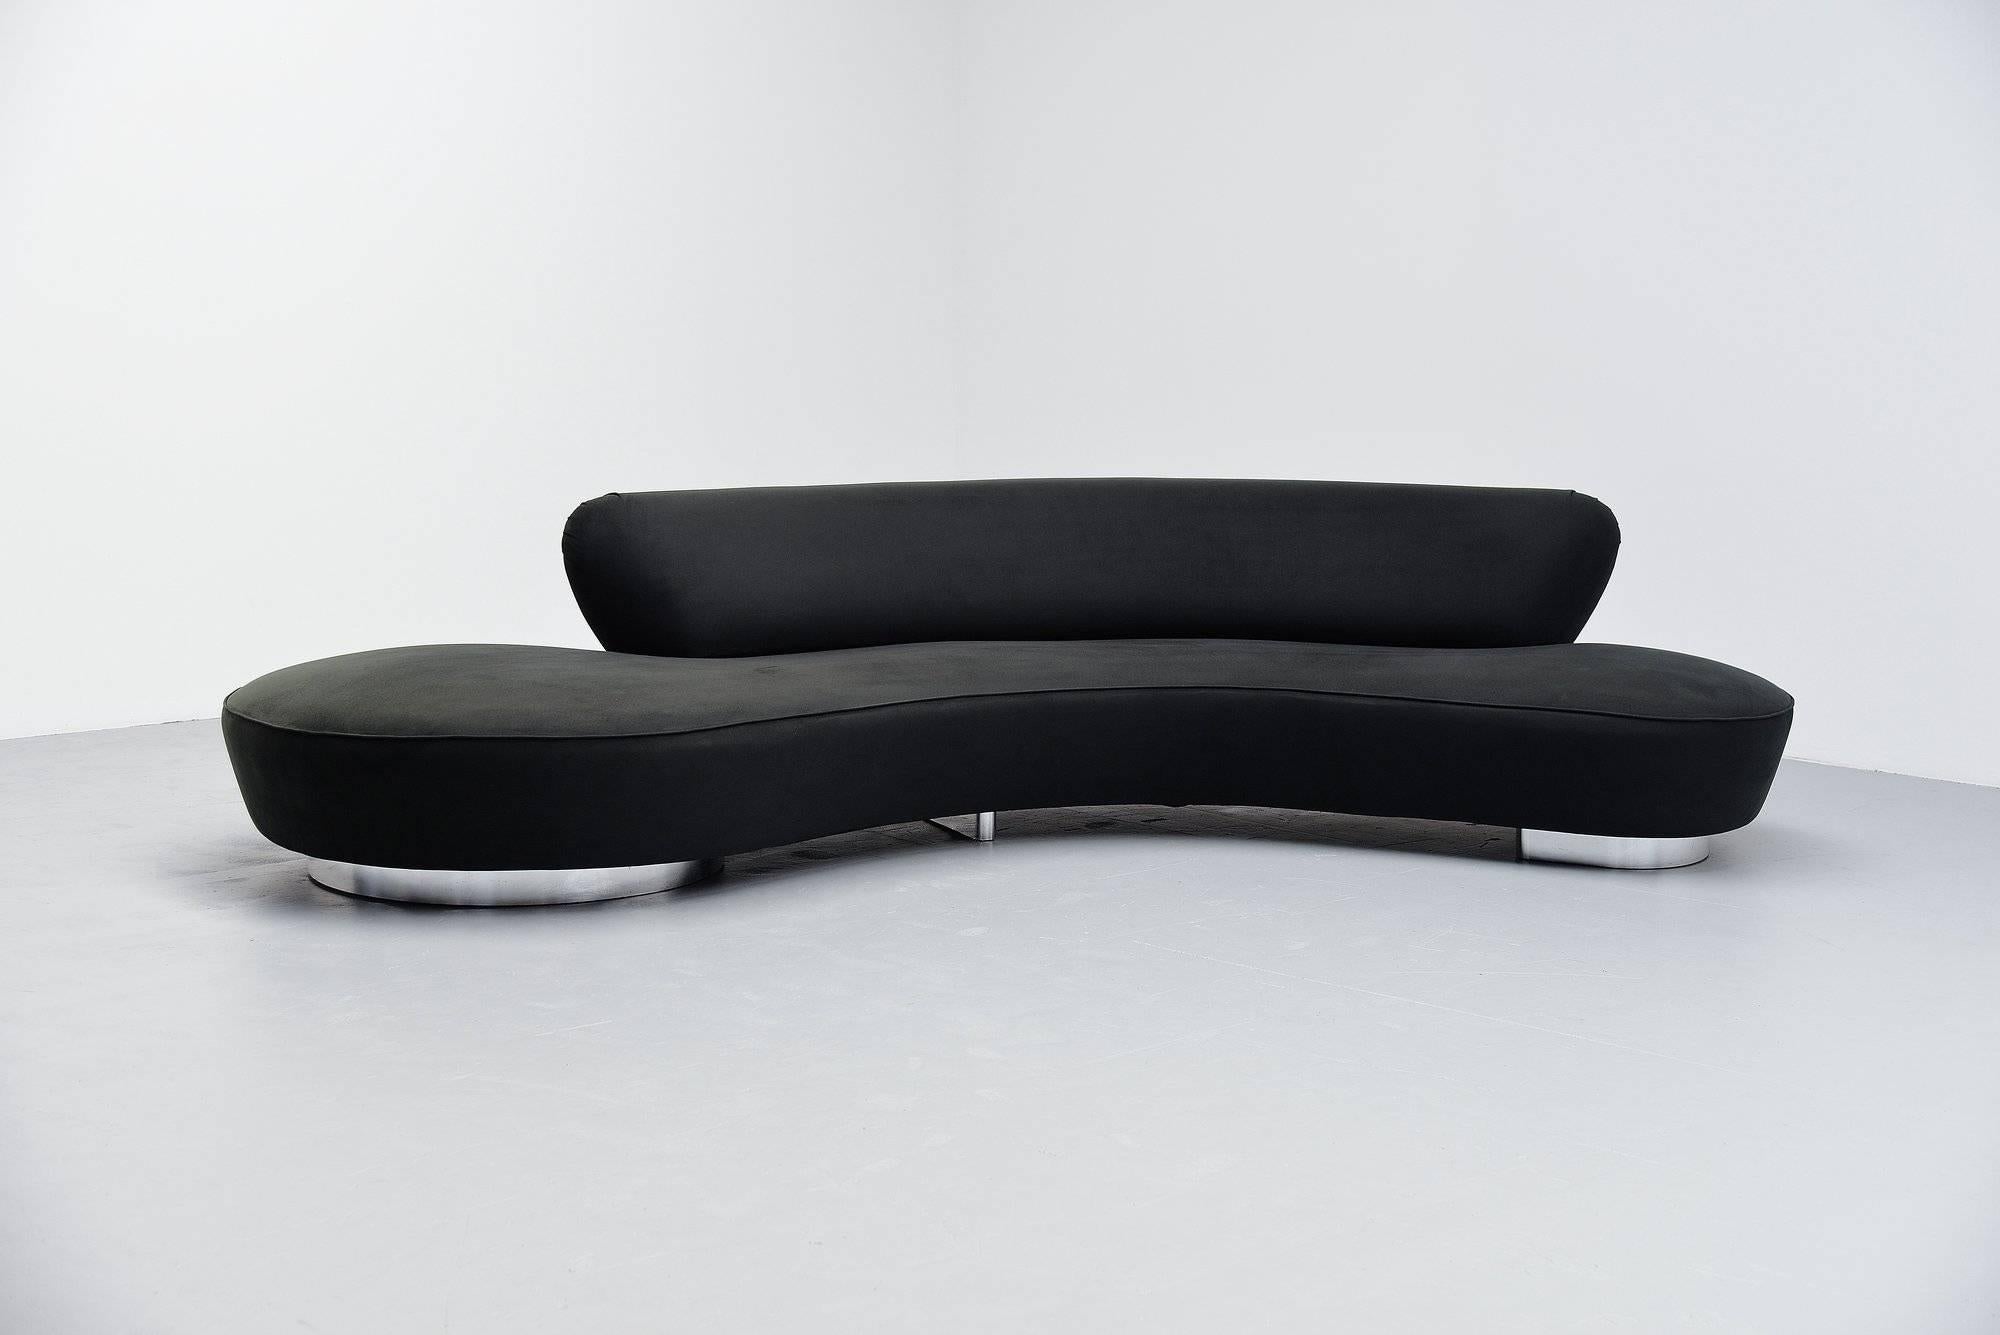 Very nice sculptural lounge sofa designed by Vladimir Kagan and manufactured by Directional, United States 1999. This sofa was upholstered upon request in black suede of high quality. The sofa is not marked but this was purchased ca 1999 and used in